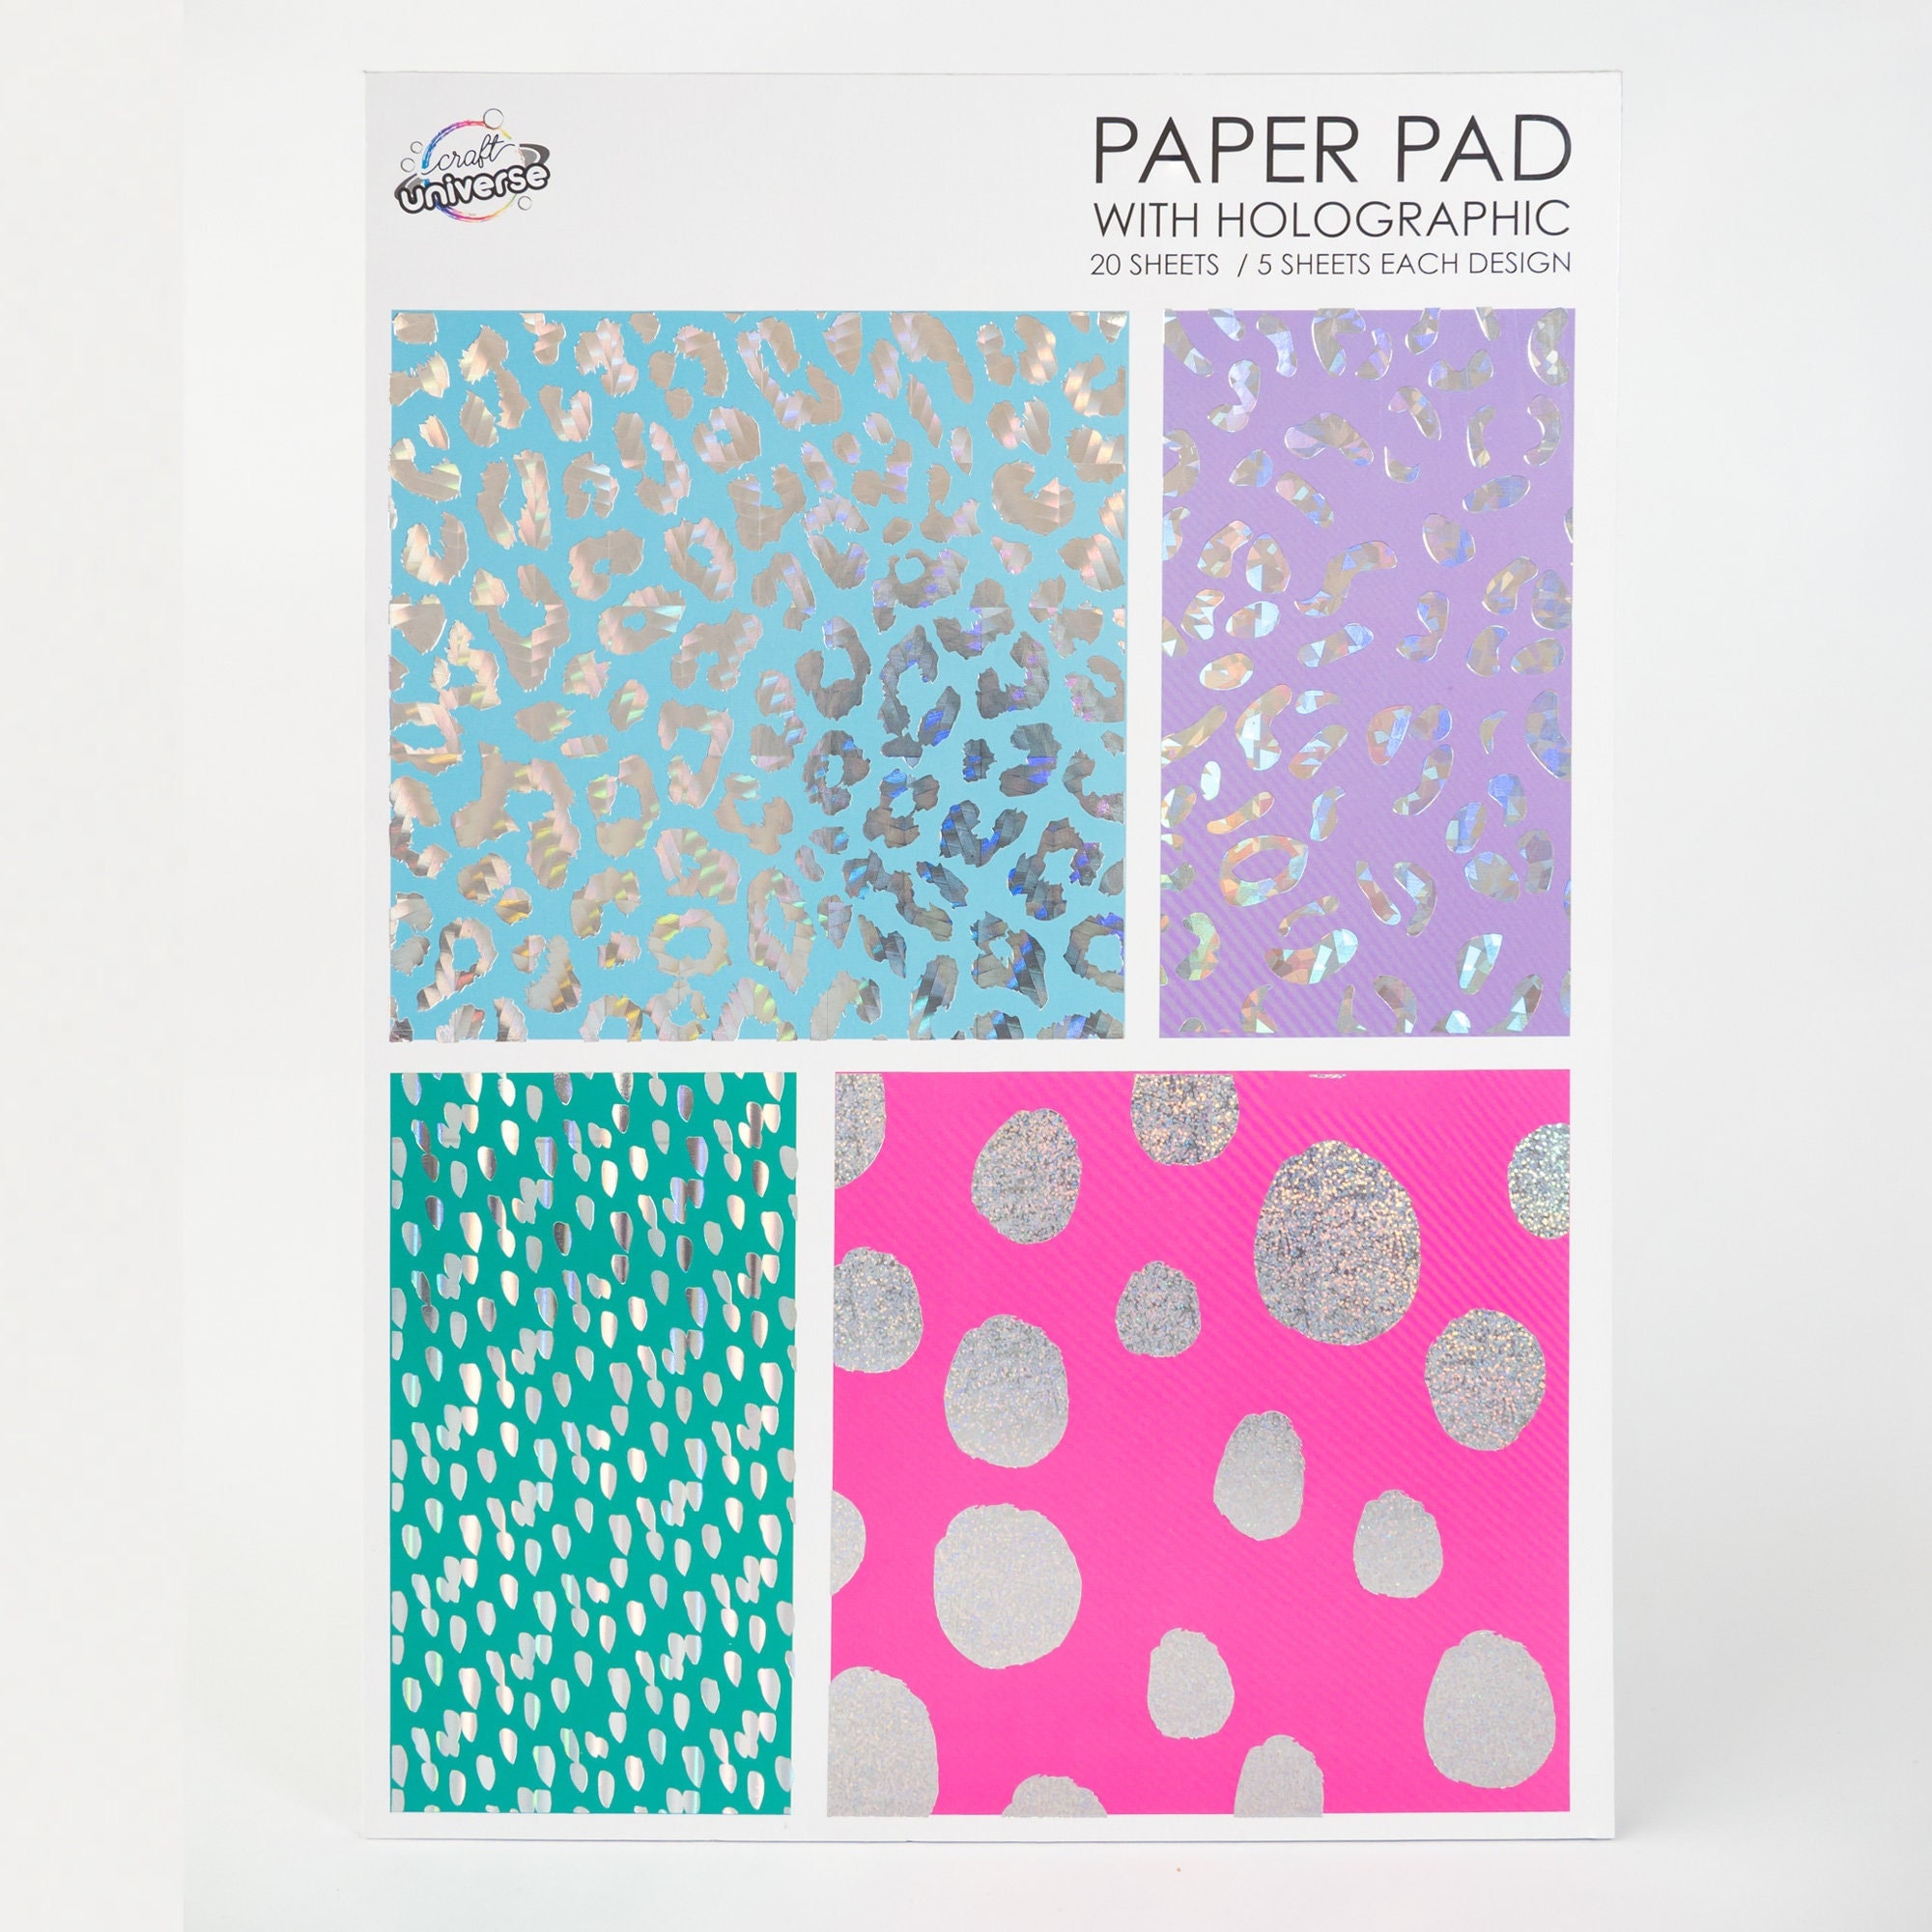 Paper Pad With Holographic 20 Sheets / 5 Sheets Each Design Craft Universe  -  Finland